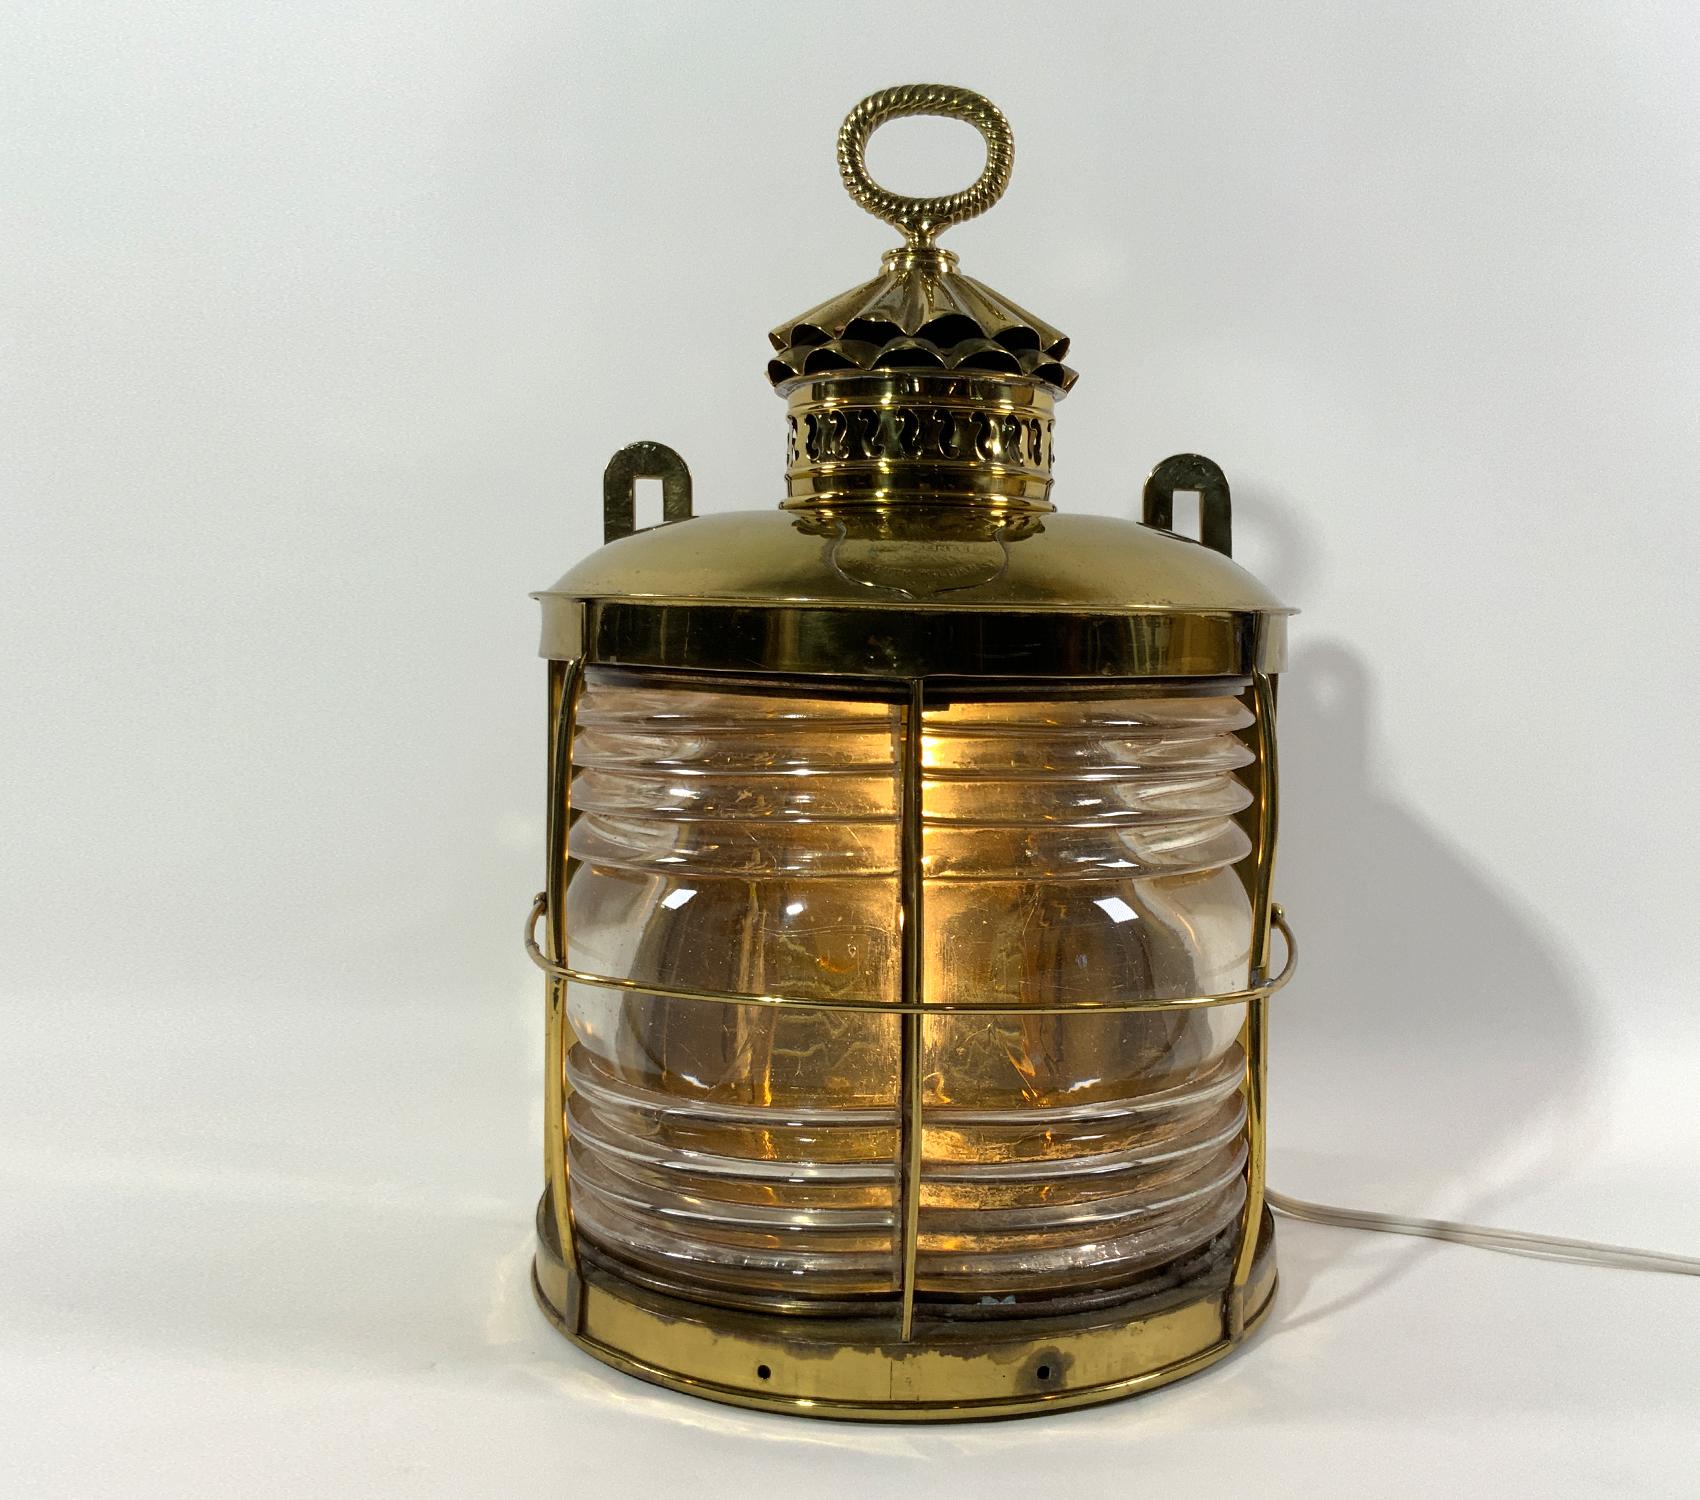 Solid brass nineteenth century ships masthead lantern with brass label from 